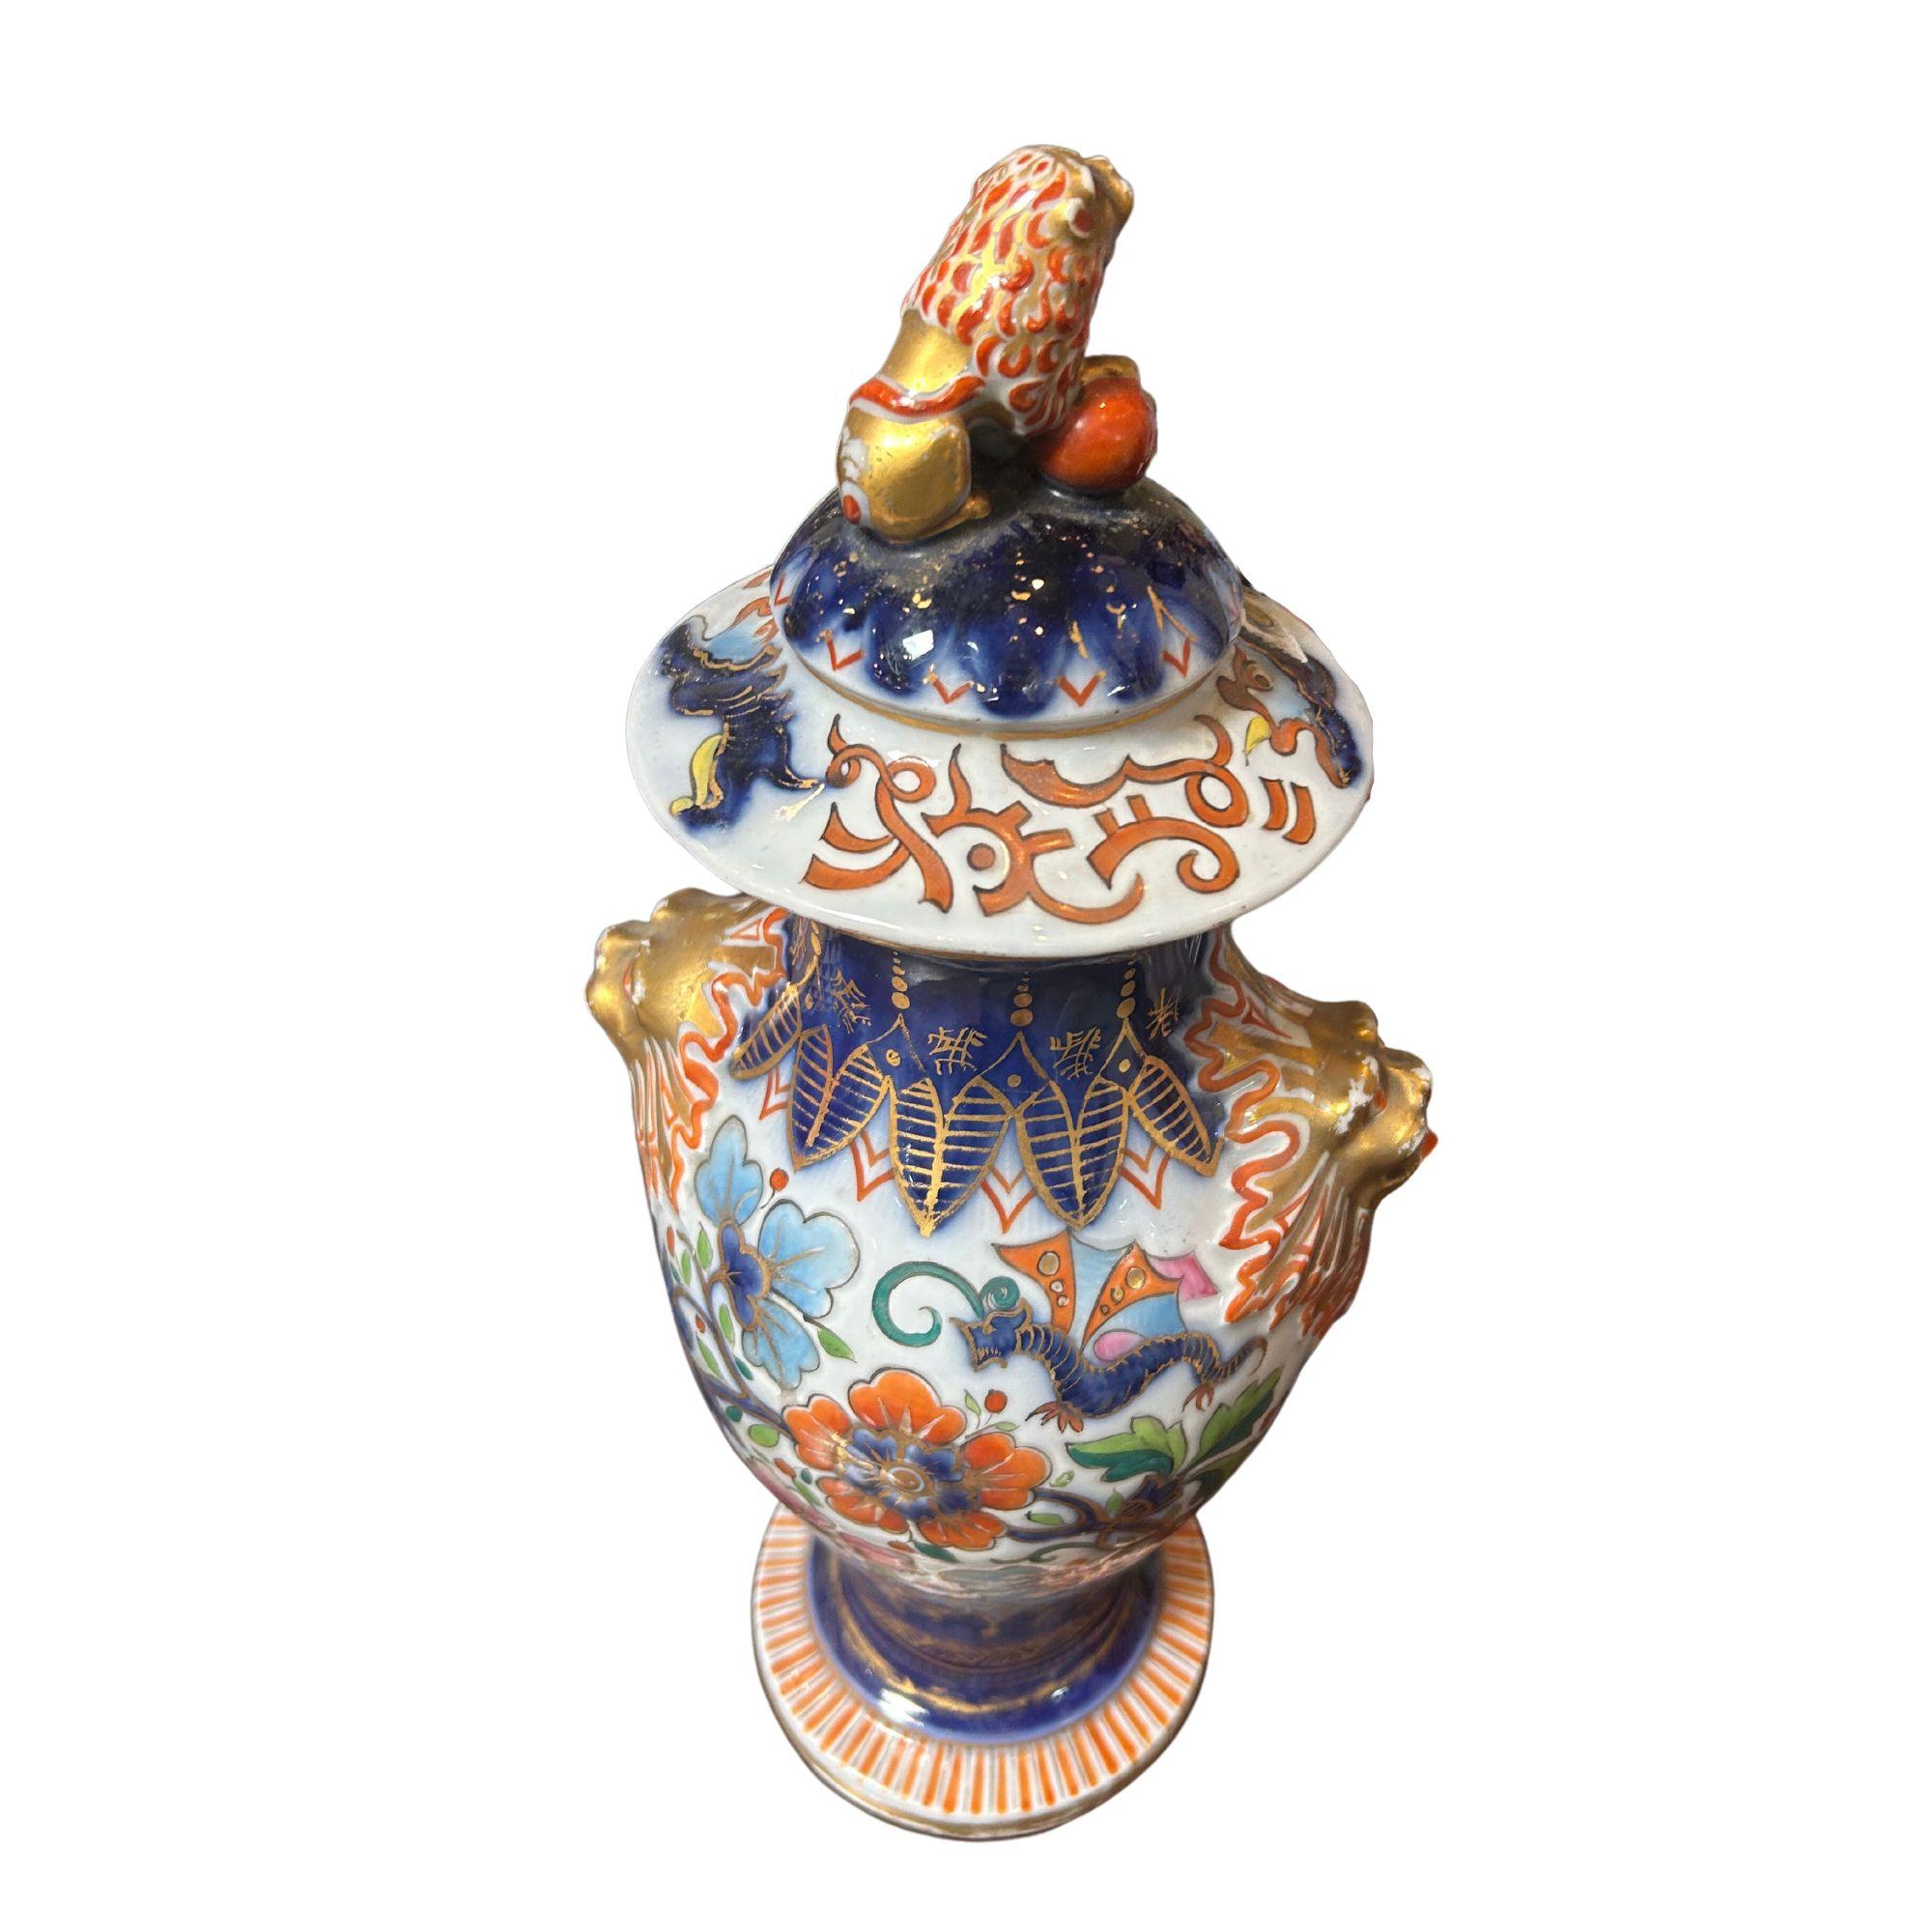 19th Century Painted Chinese Export Clobbered Ware with gold gilt accents of beautiful Chinese figures and colorful floral motifs and lion head motif with lid purchased in Paris